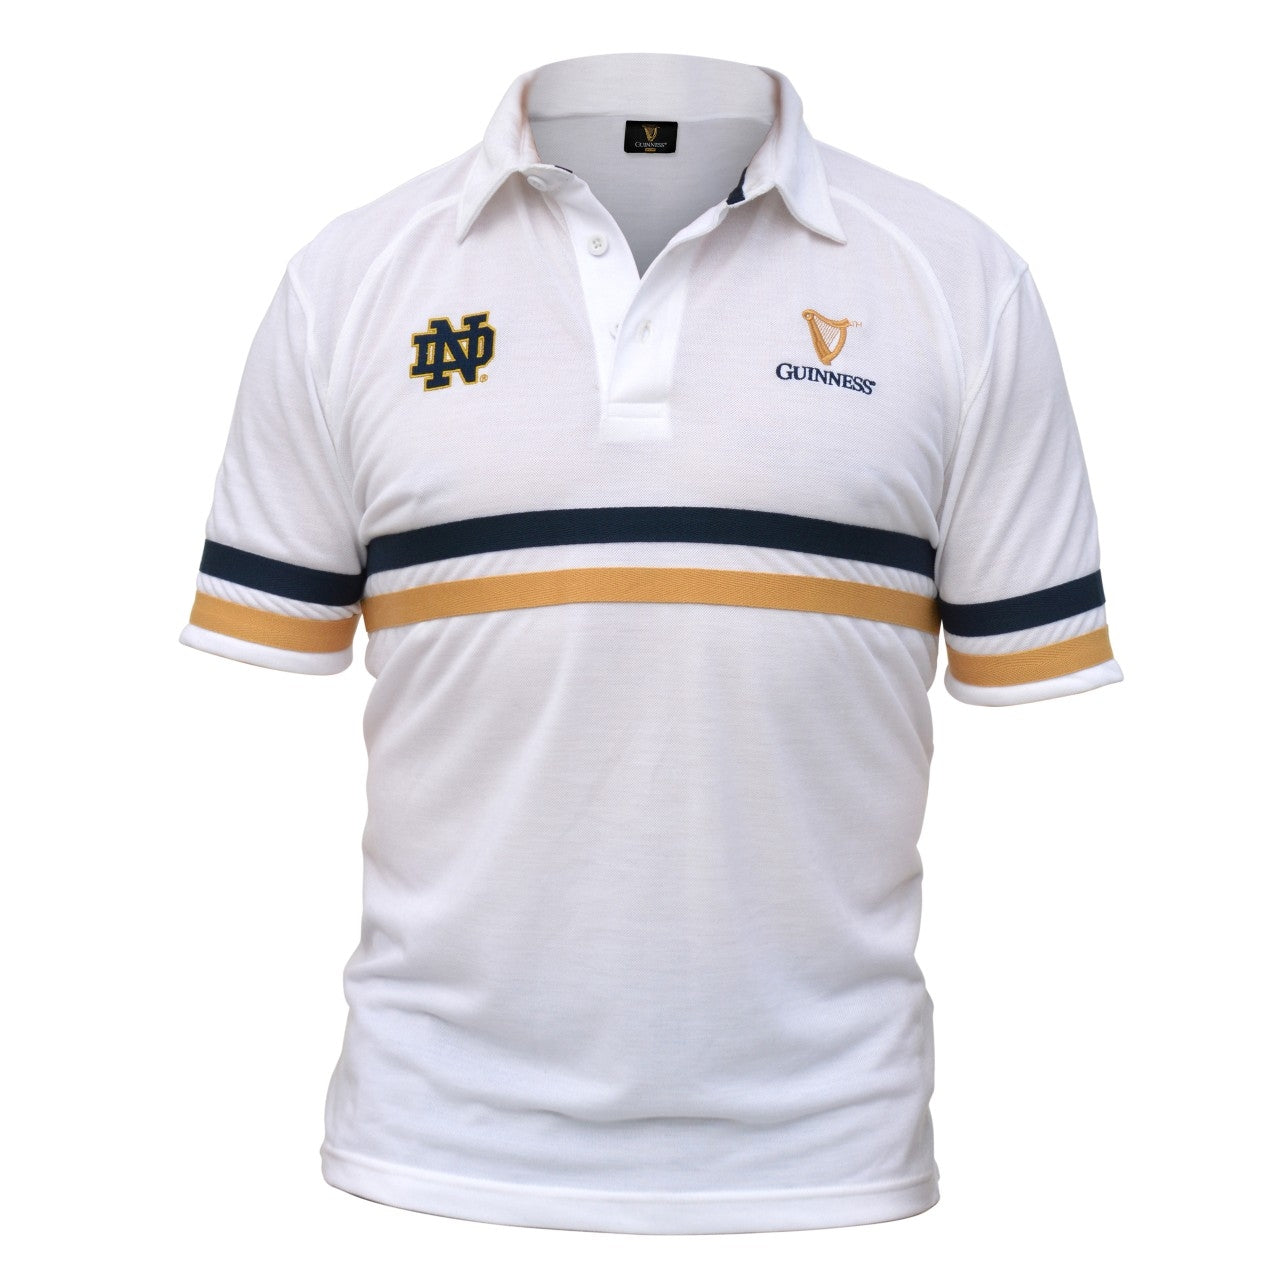 A Guinness Notre Dame Performance Polo Shirt White with a gold and white stripe.